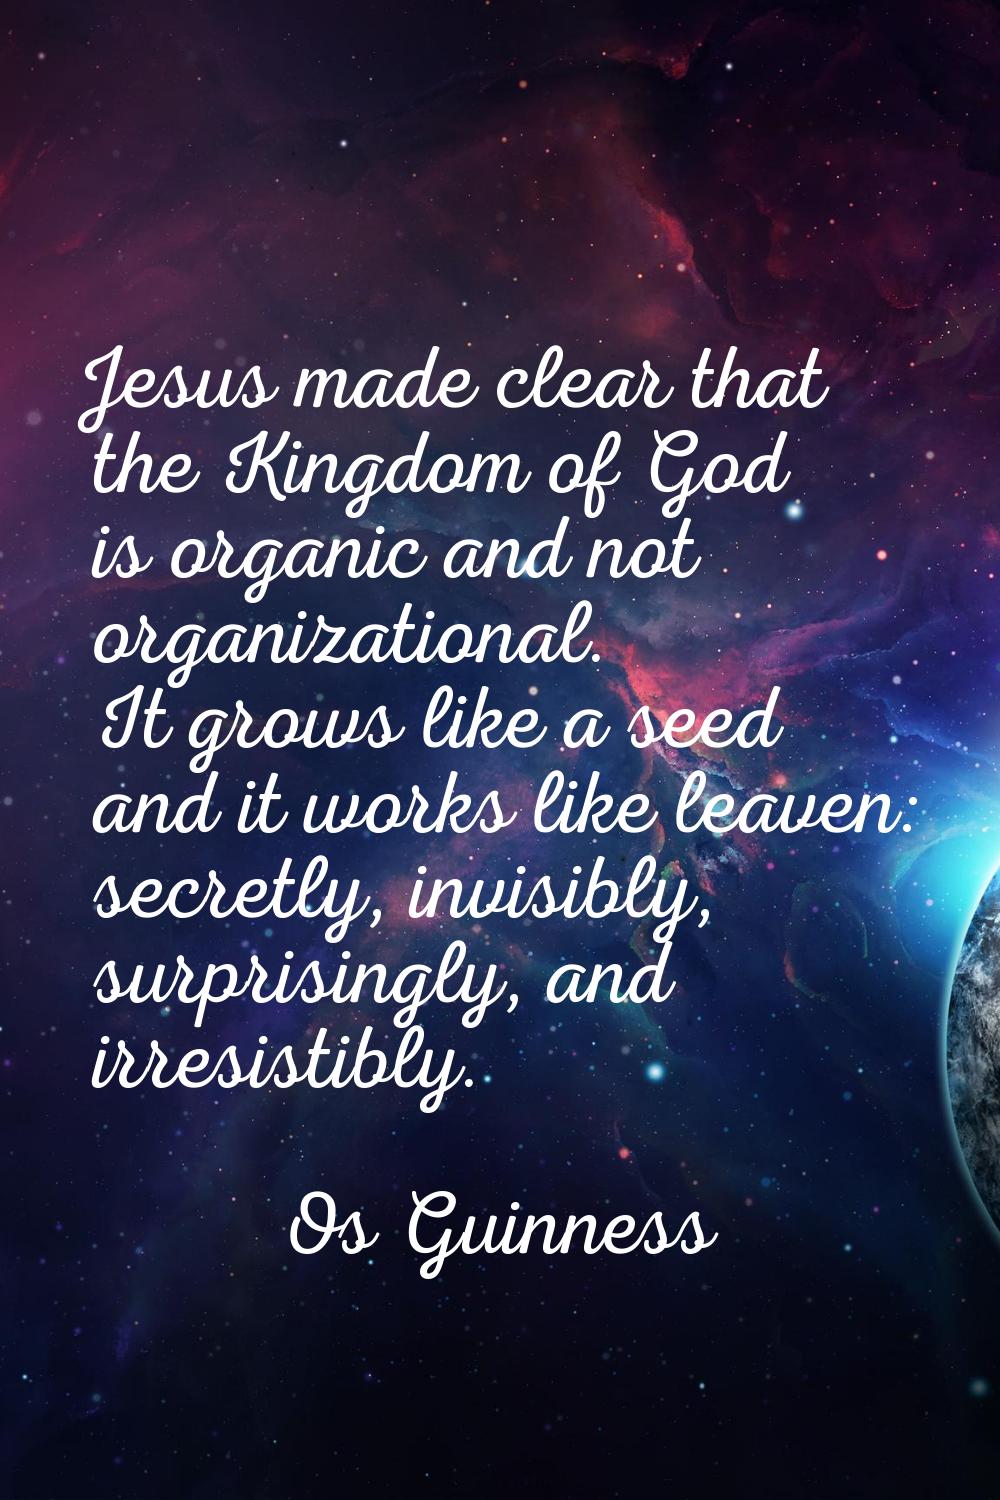 Jesus made clear that the Kingdom of God is organic and not organizational. It grows like a seed an